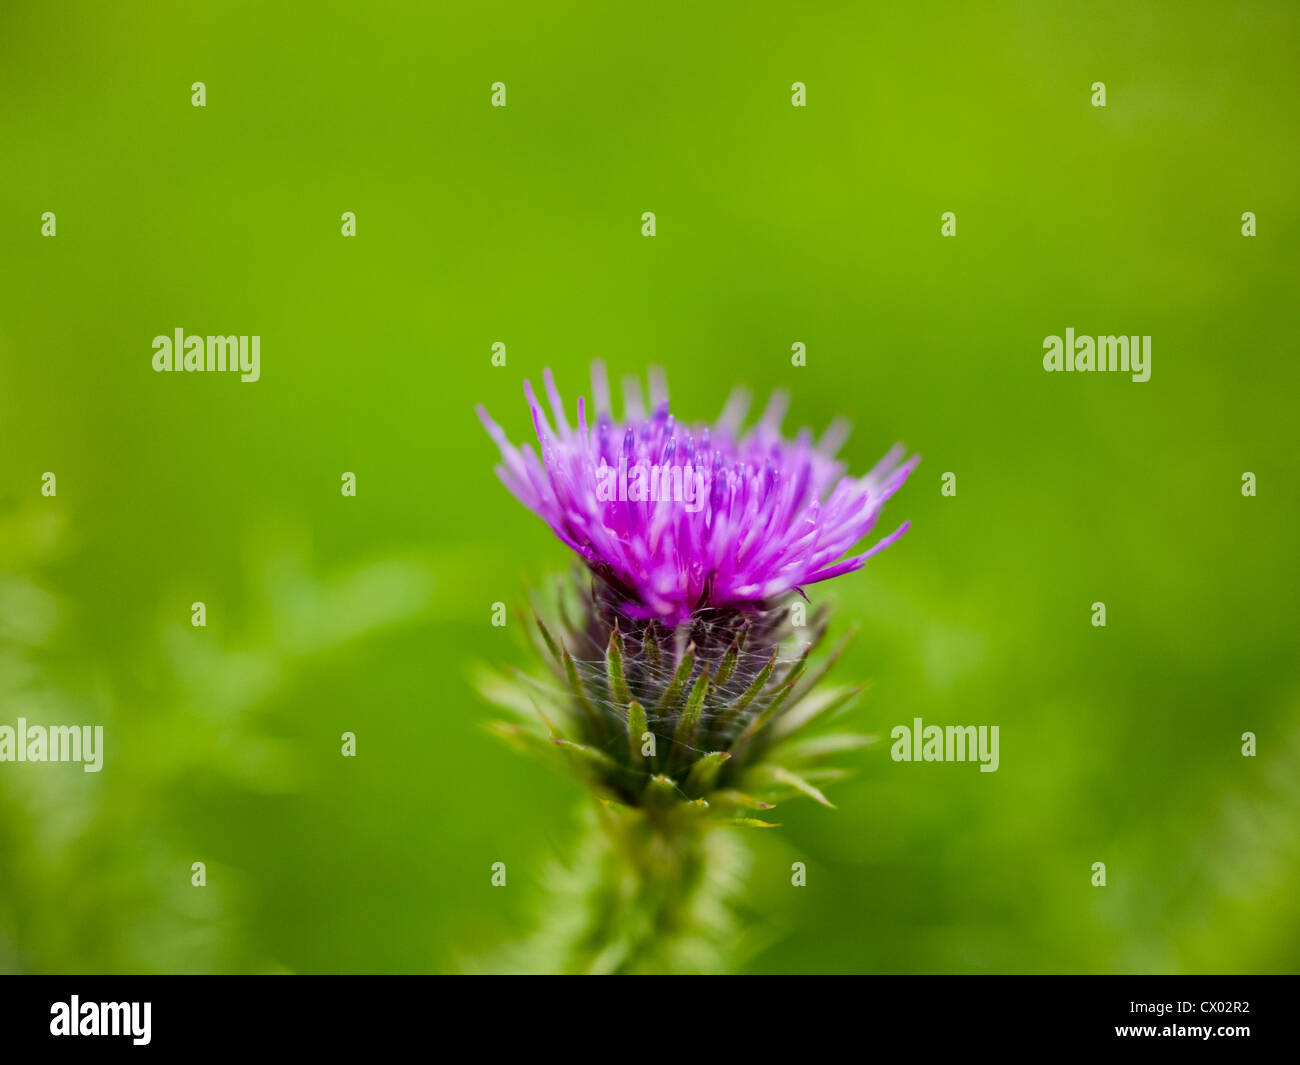 Landscape macro close up of thistle flower Carduus crispus, the Welted Thistle, on blurred green background. Stock Photo